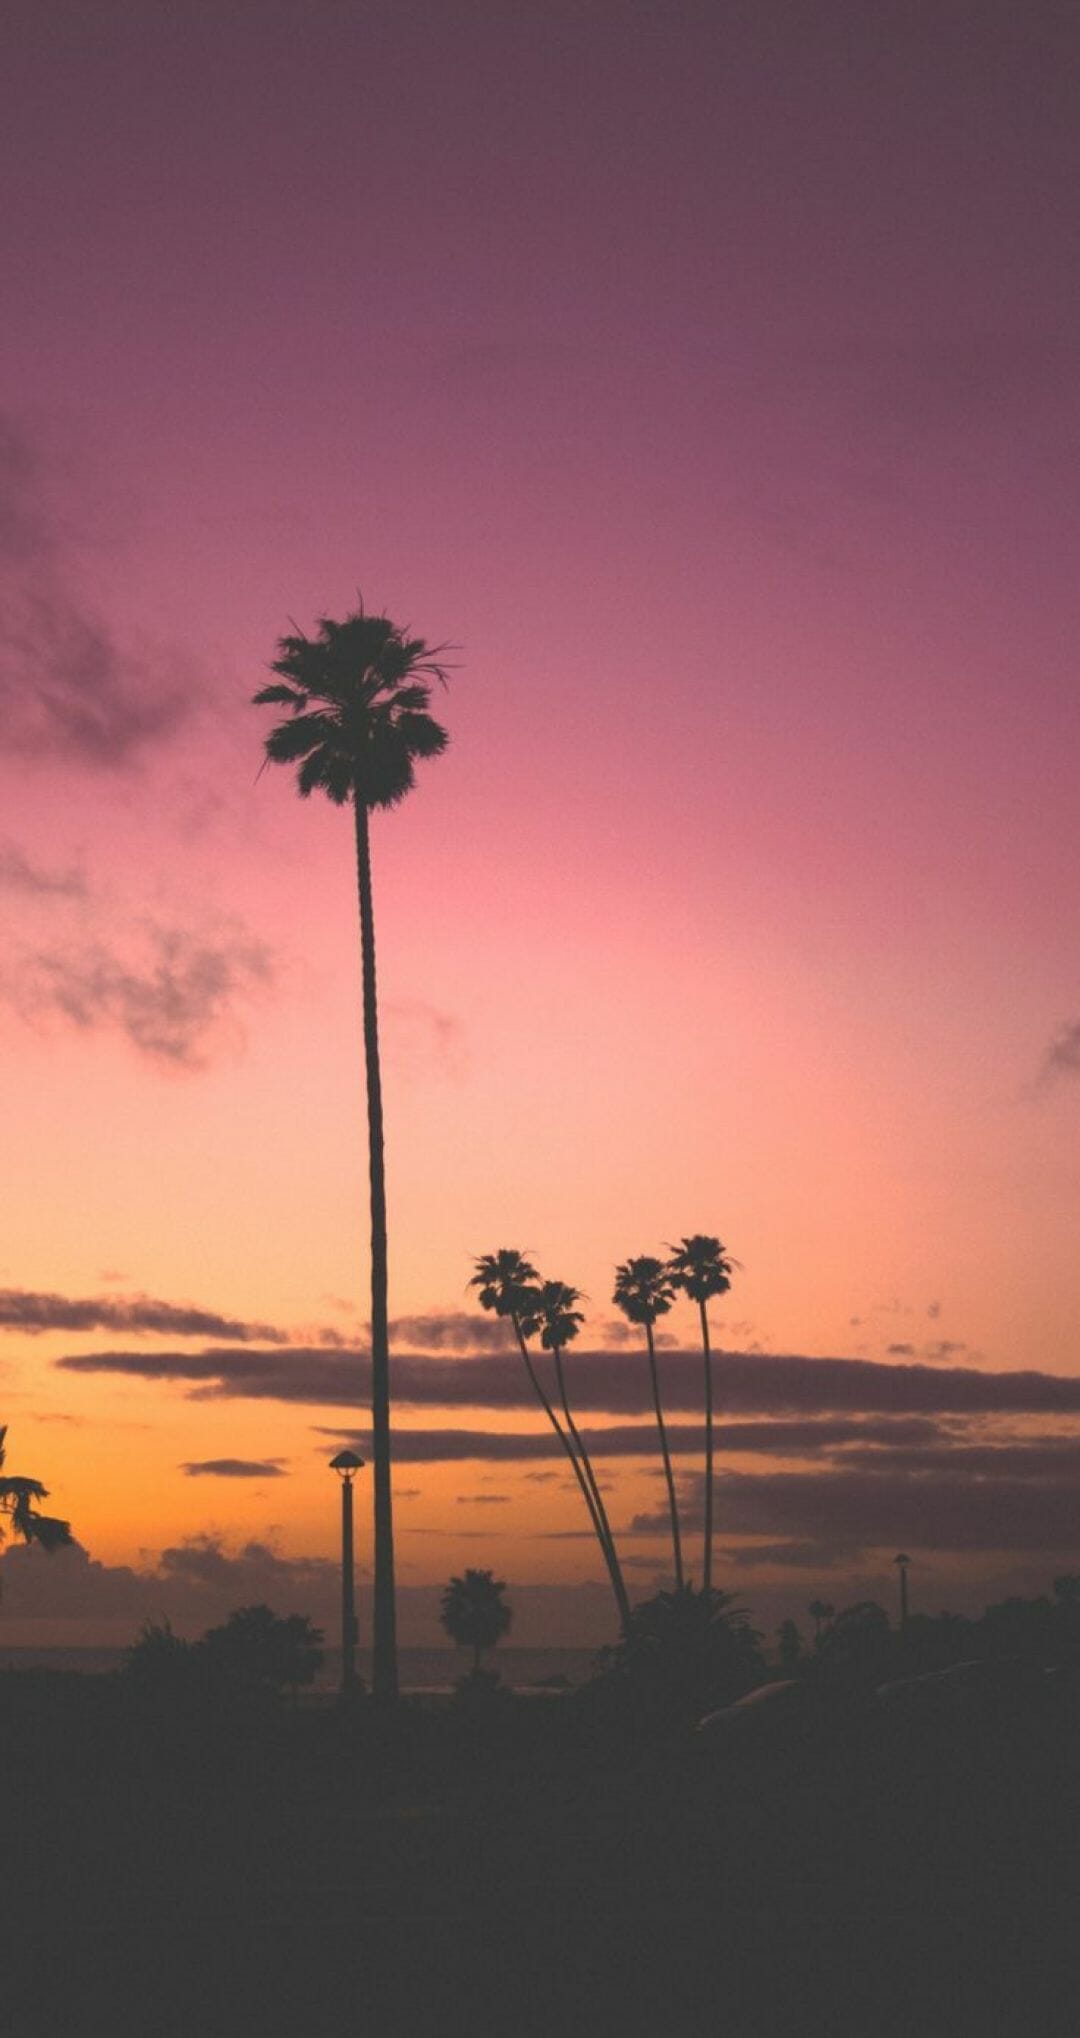 IPhone wallpaper of palm trees in front of a sunset - California